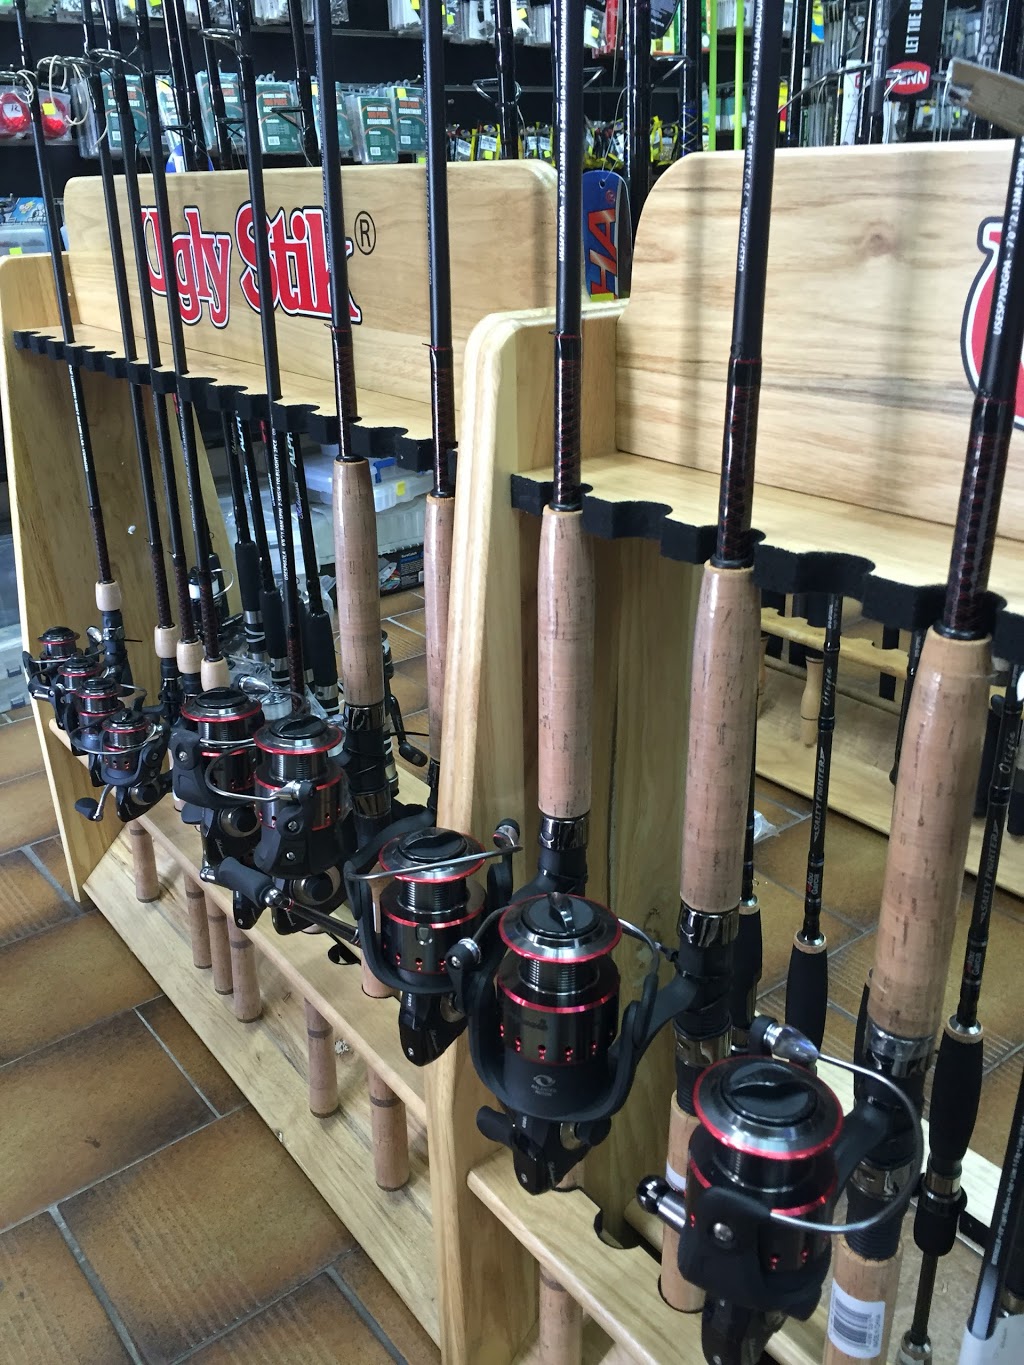 Extreme Fishing | store | 302/304 Woodville Rd, Guildford NSW 2161, Australia | 0287396340 OR +61 2 8739 6340